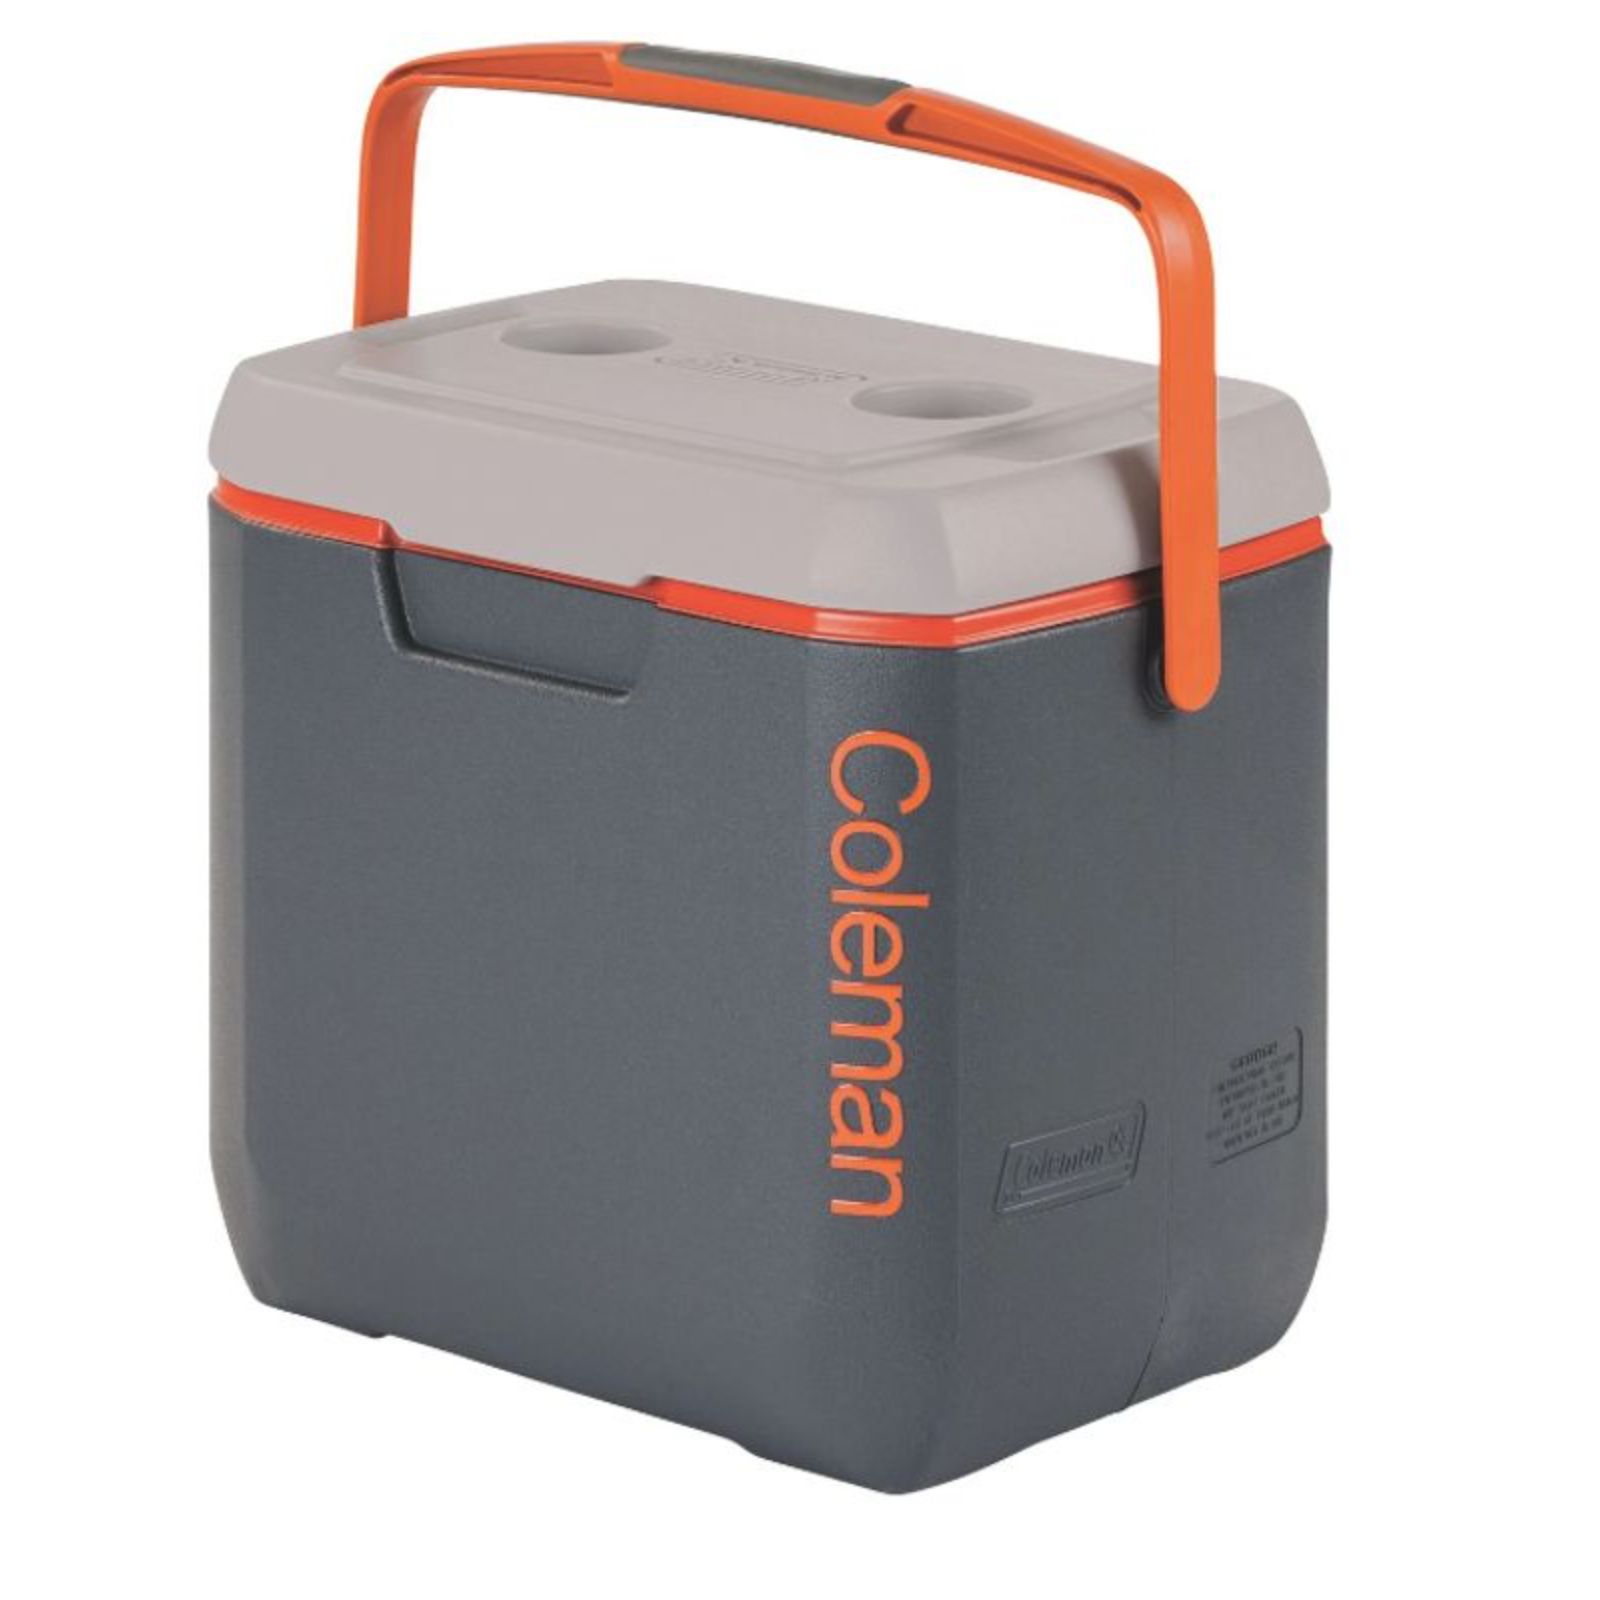 Coleman Cooler 28Qt Dgry Org Lgry Omld 5878 C004 - image 1 of 8